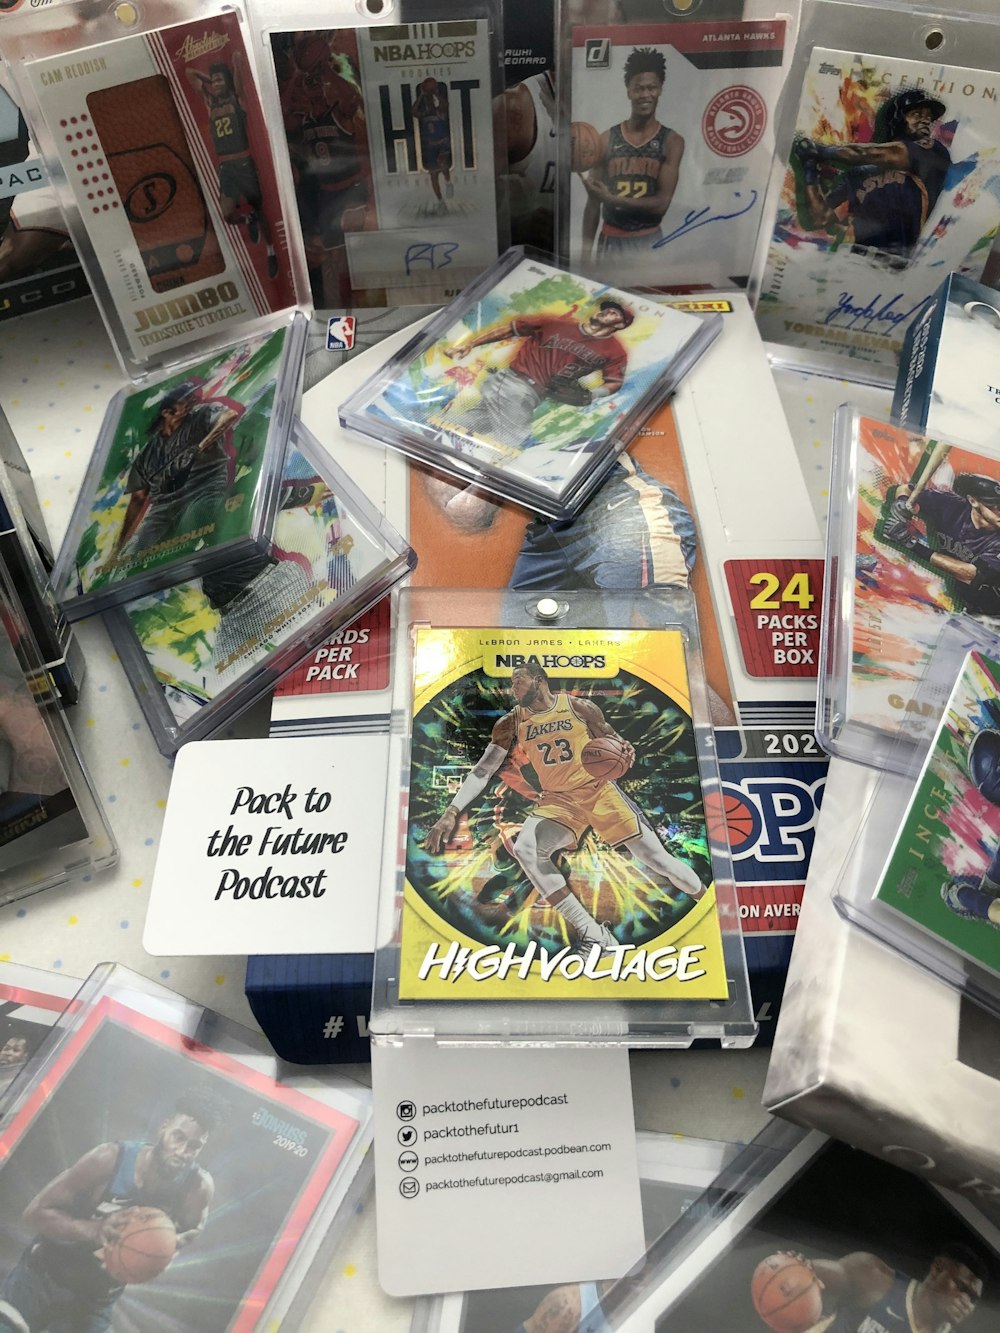 Episode 6: Card Carnage, Nice Lebron hit, Ricky is Back, Ripping NBA boxes and CONTEST WINNERS!